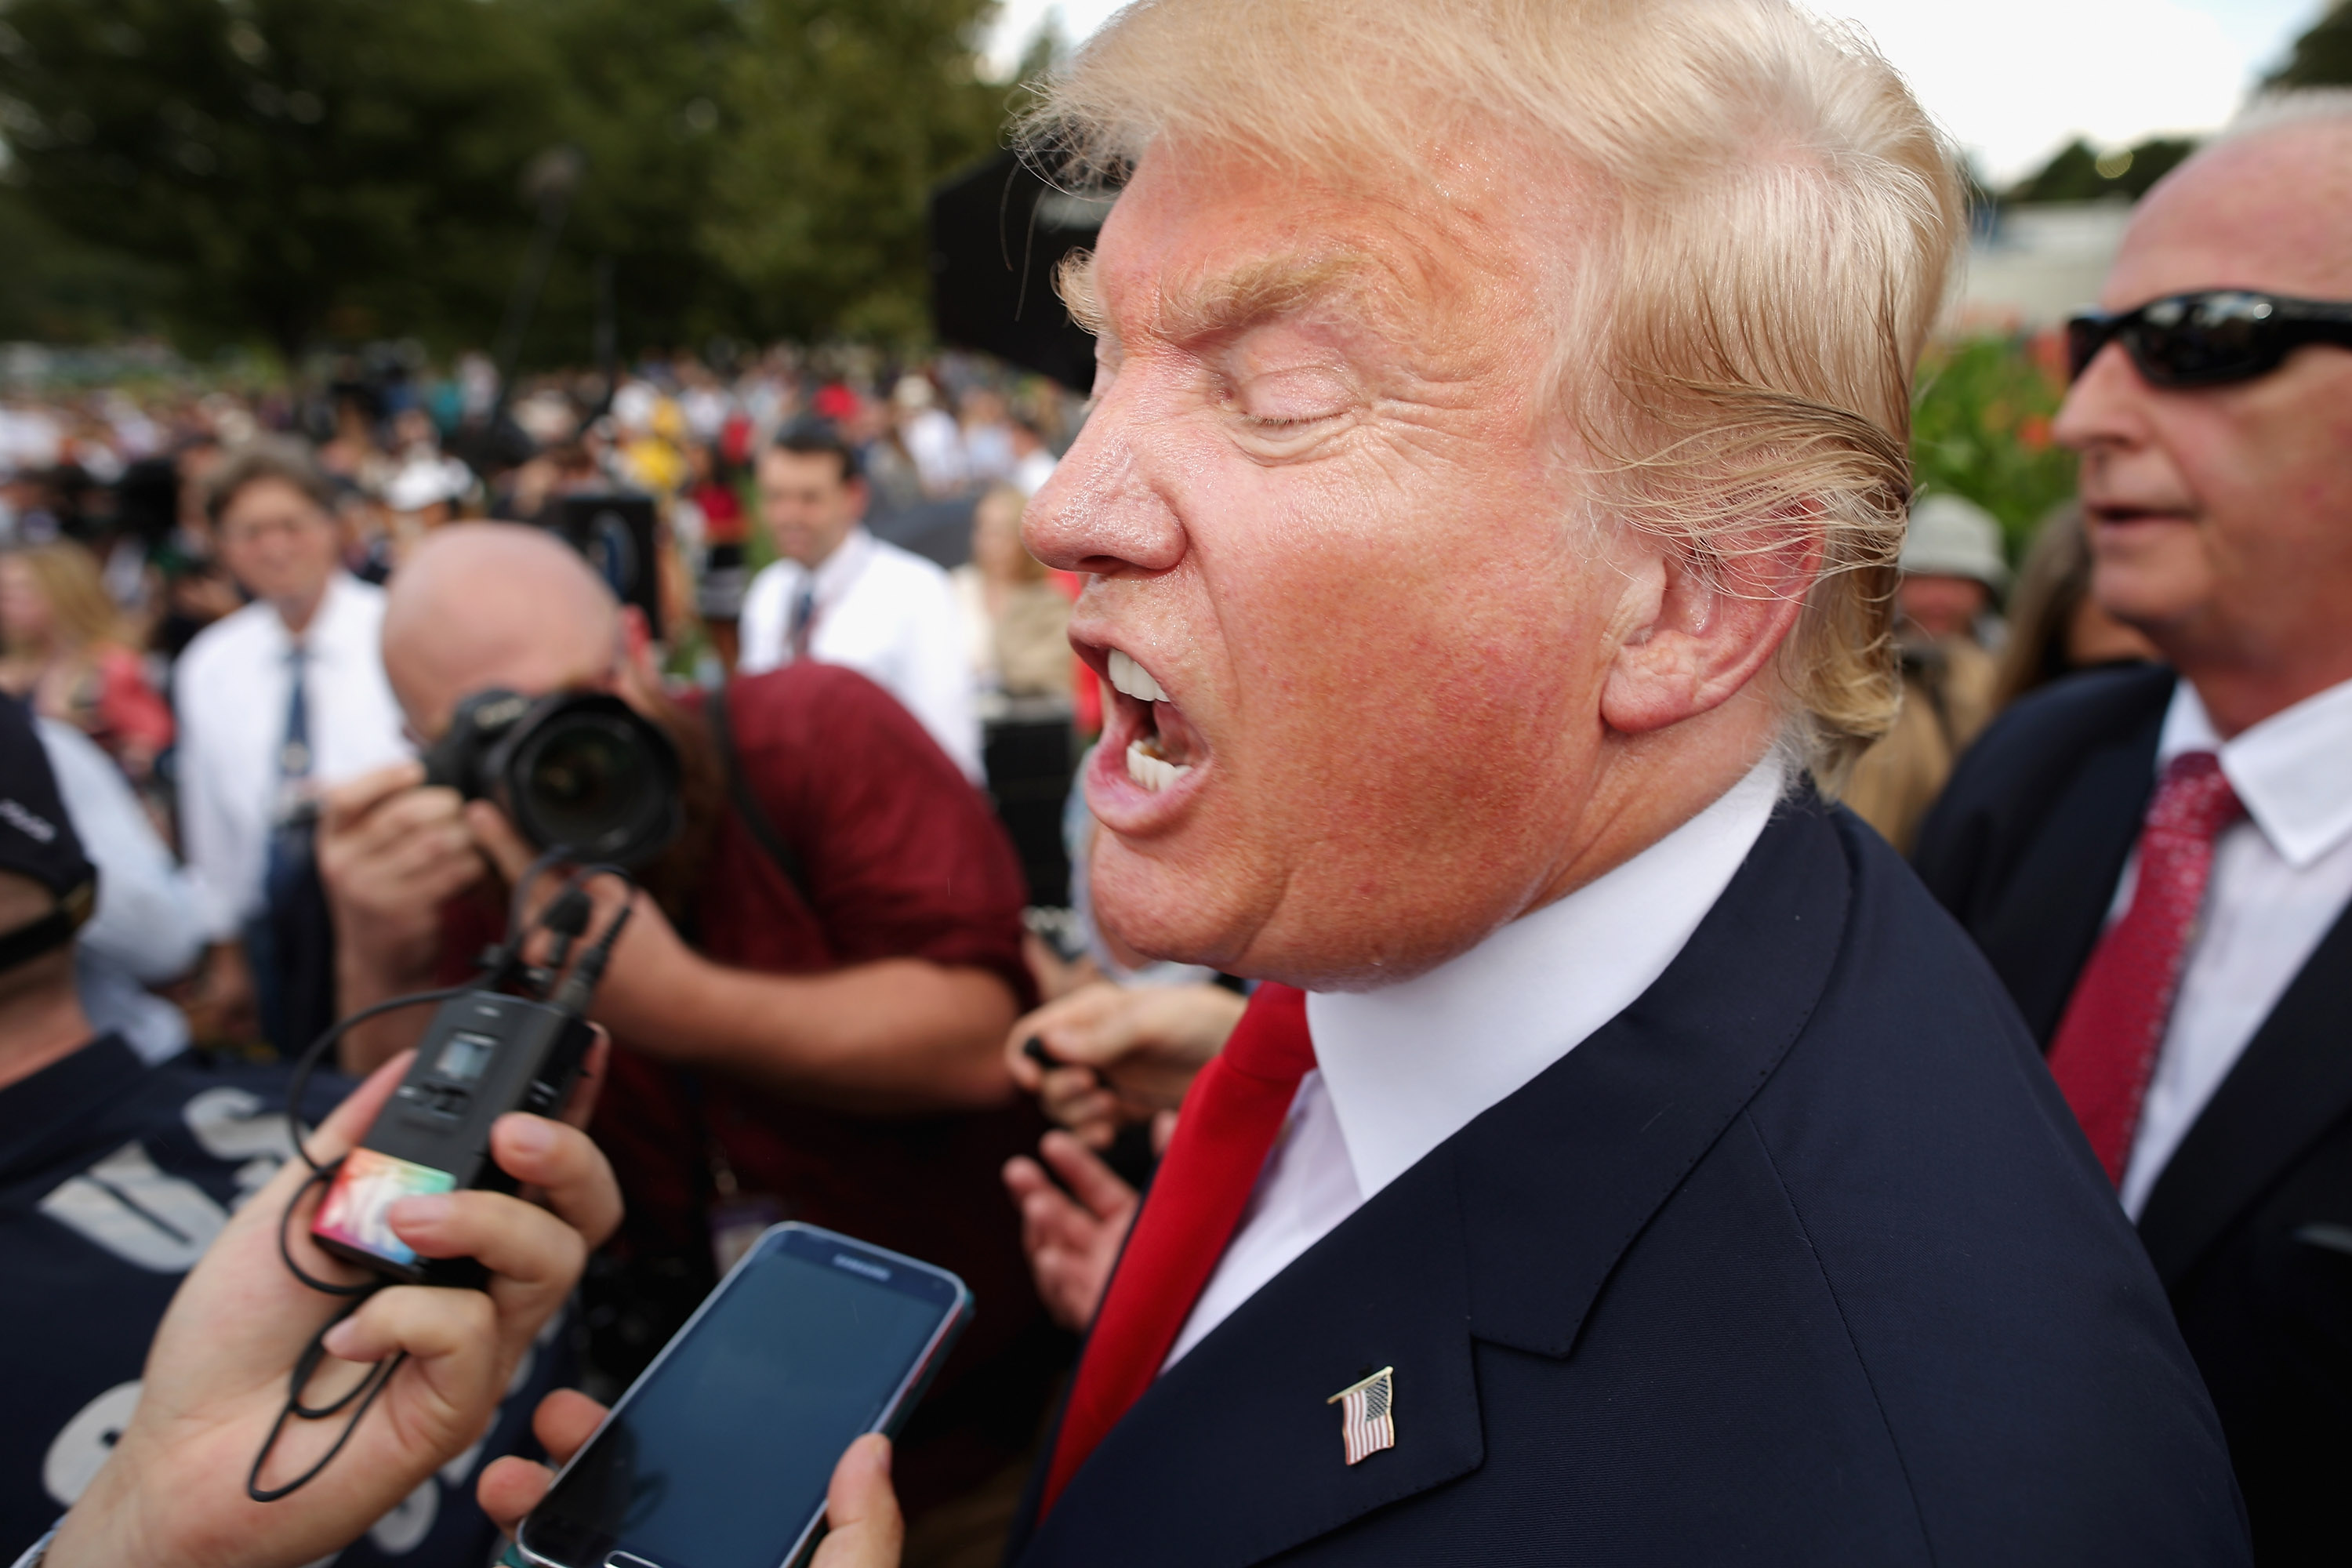 Republican presidential candidate Donald Trump (2nd L) talks with journalists during a rally against the Iran nuclear deal on the West Lawn of the U.S. Capitol September 9, 2015 in Washington, DC.